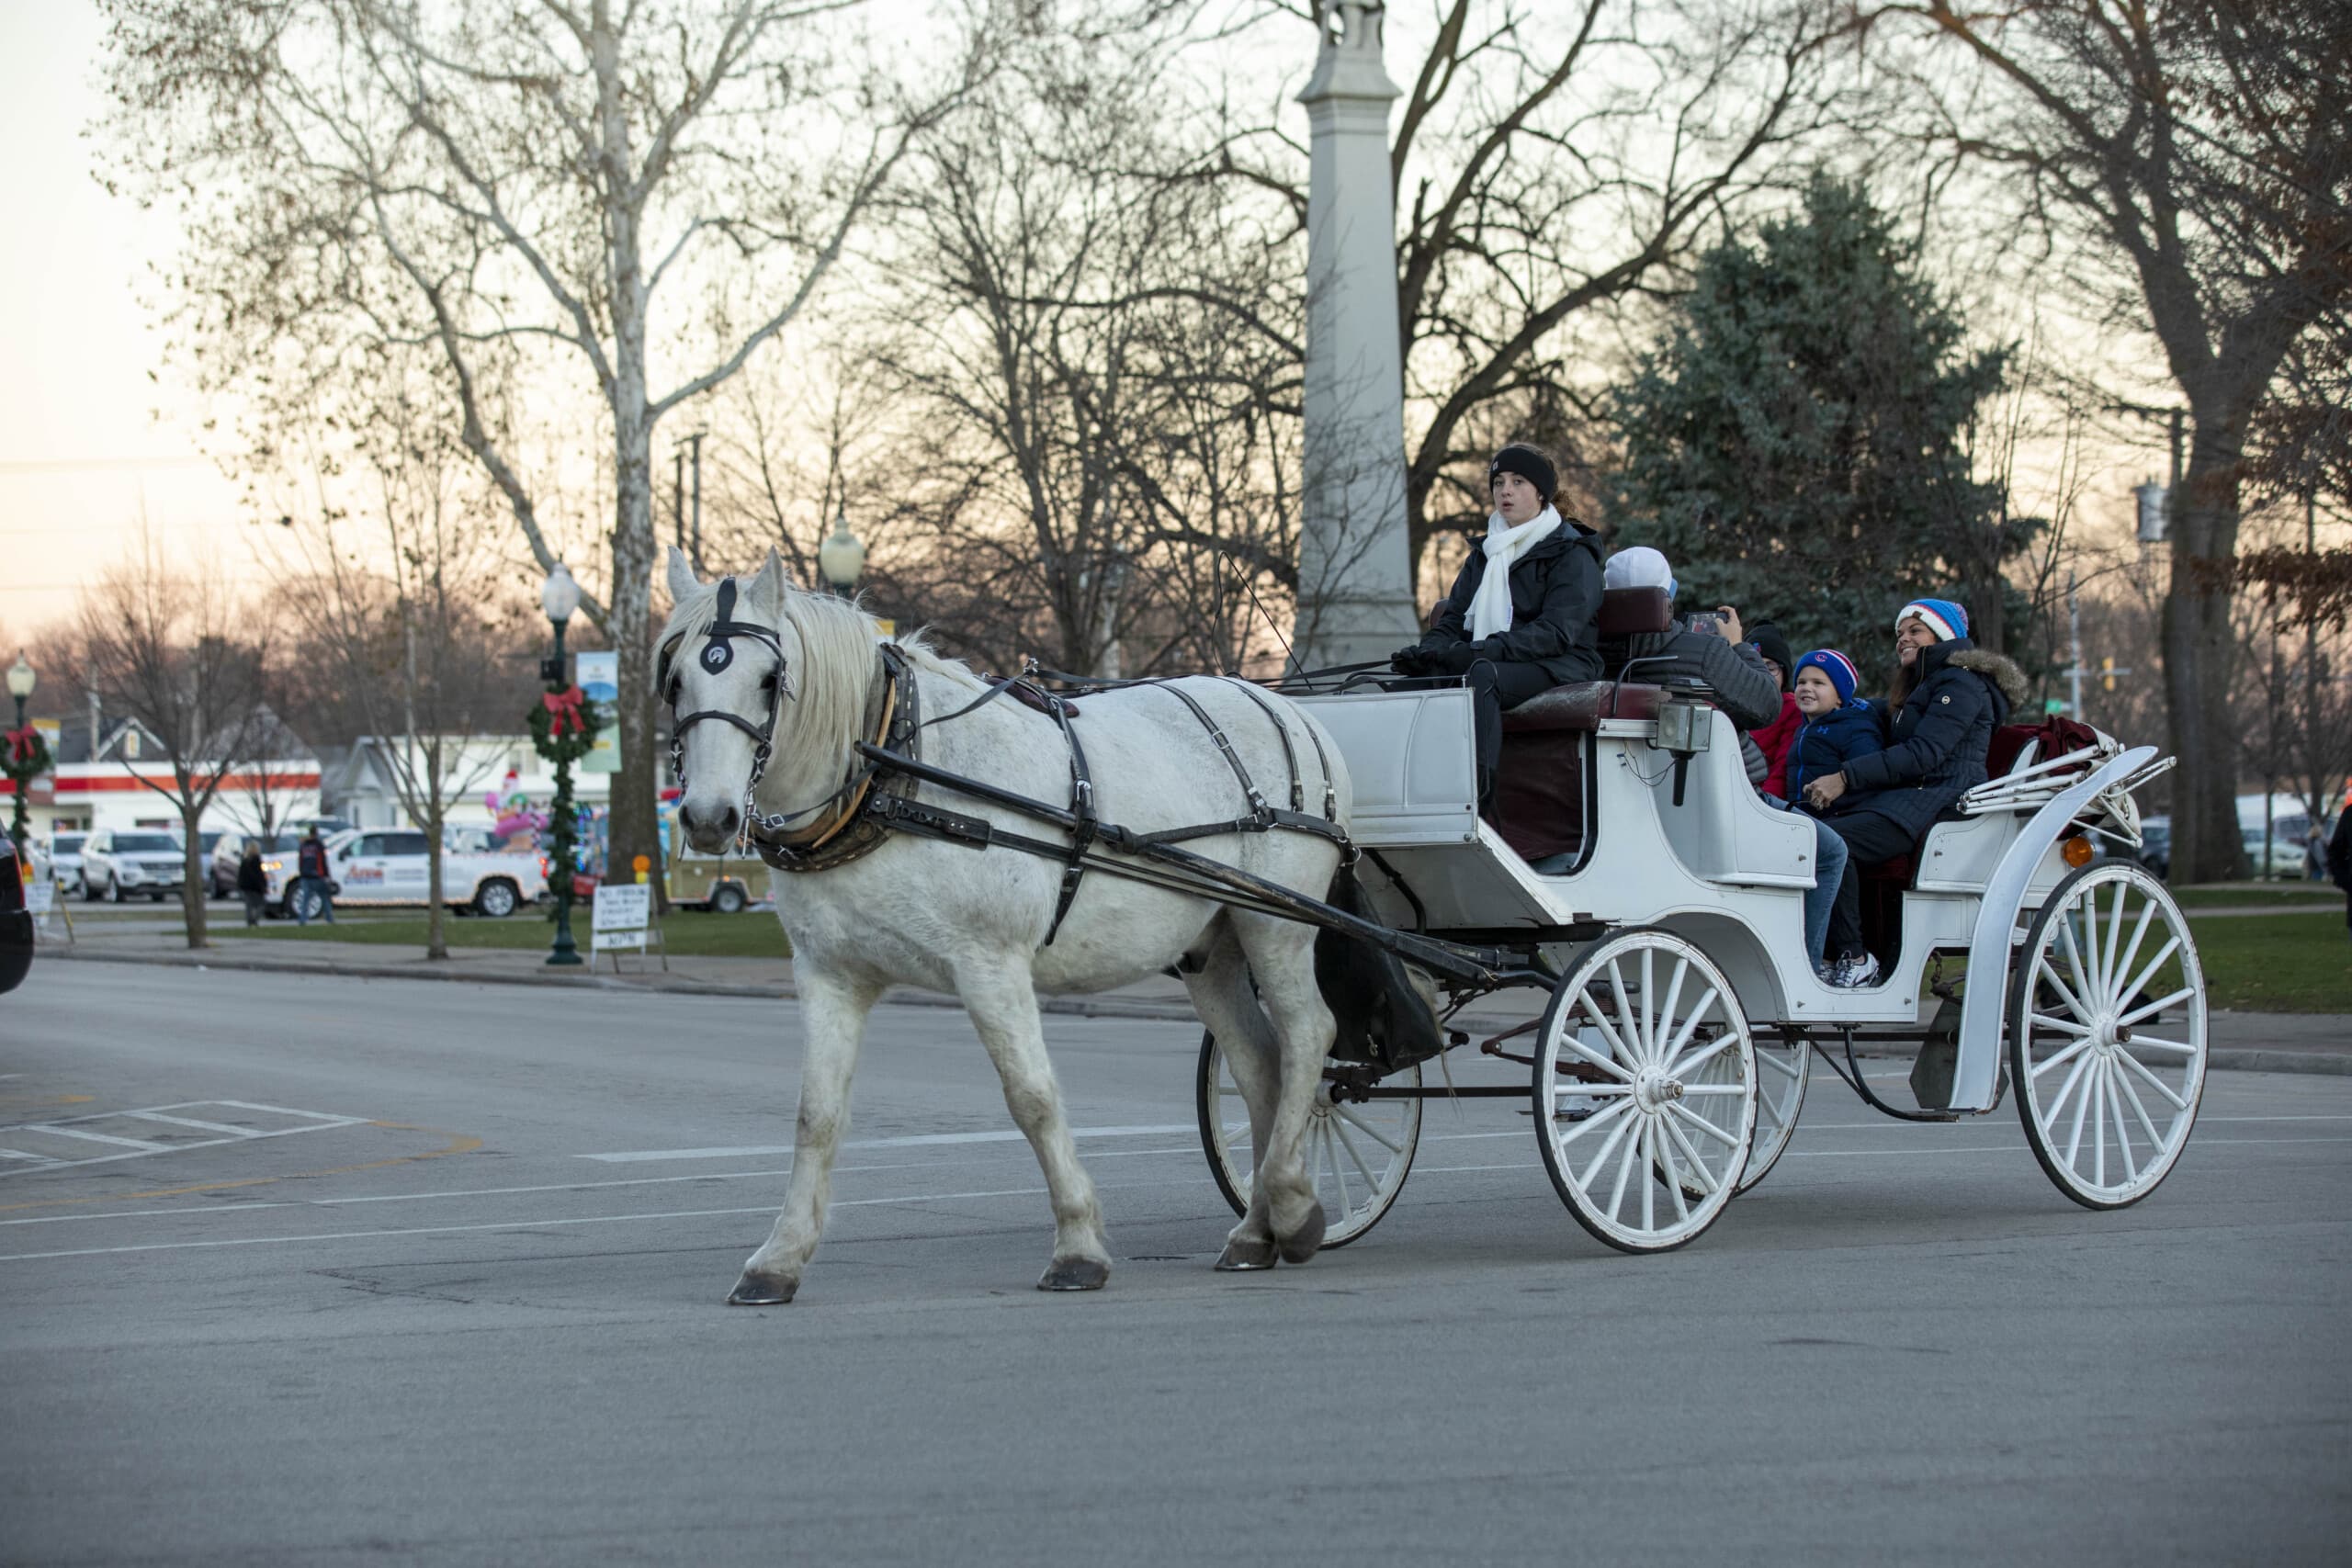 Horse-drawn carriage ride with passengers in urban park.